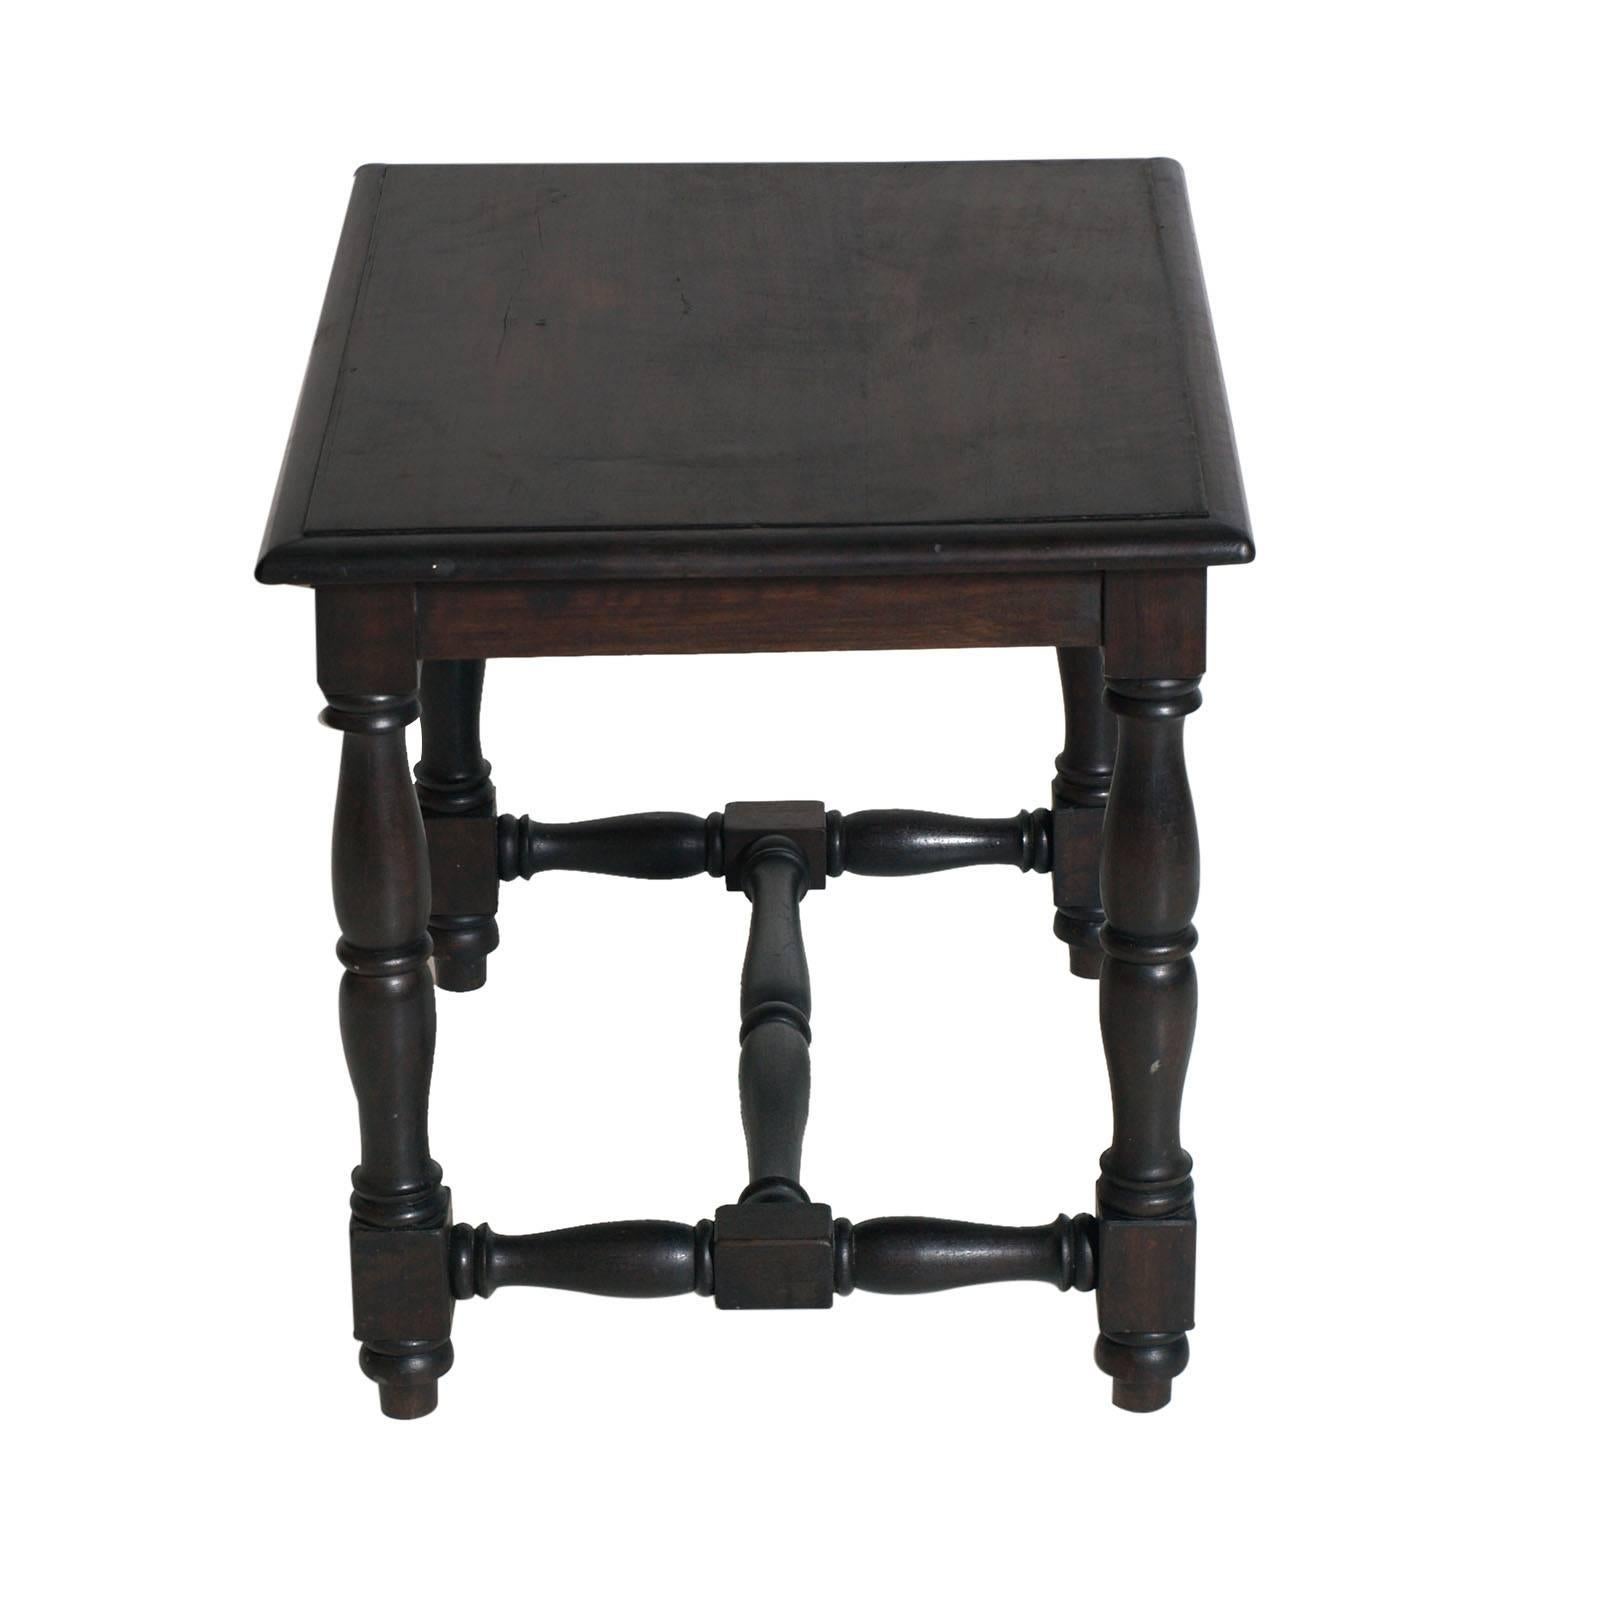 Late 19th Century Tuscan Renaissance centre side table in ebonized walnut, restored and polished to wax.

Measure cm: H 47 x W 57 x D 45.
 